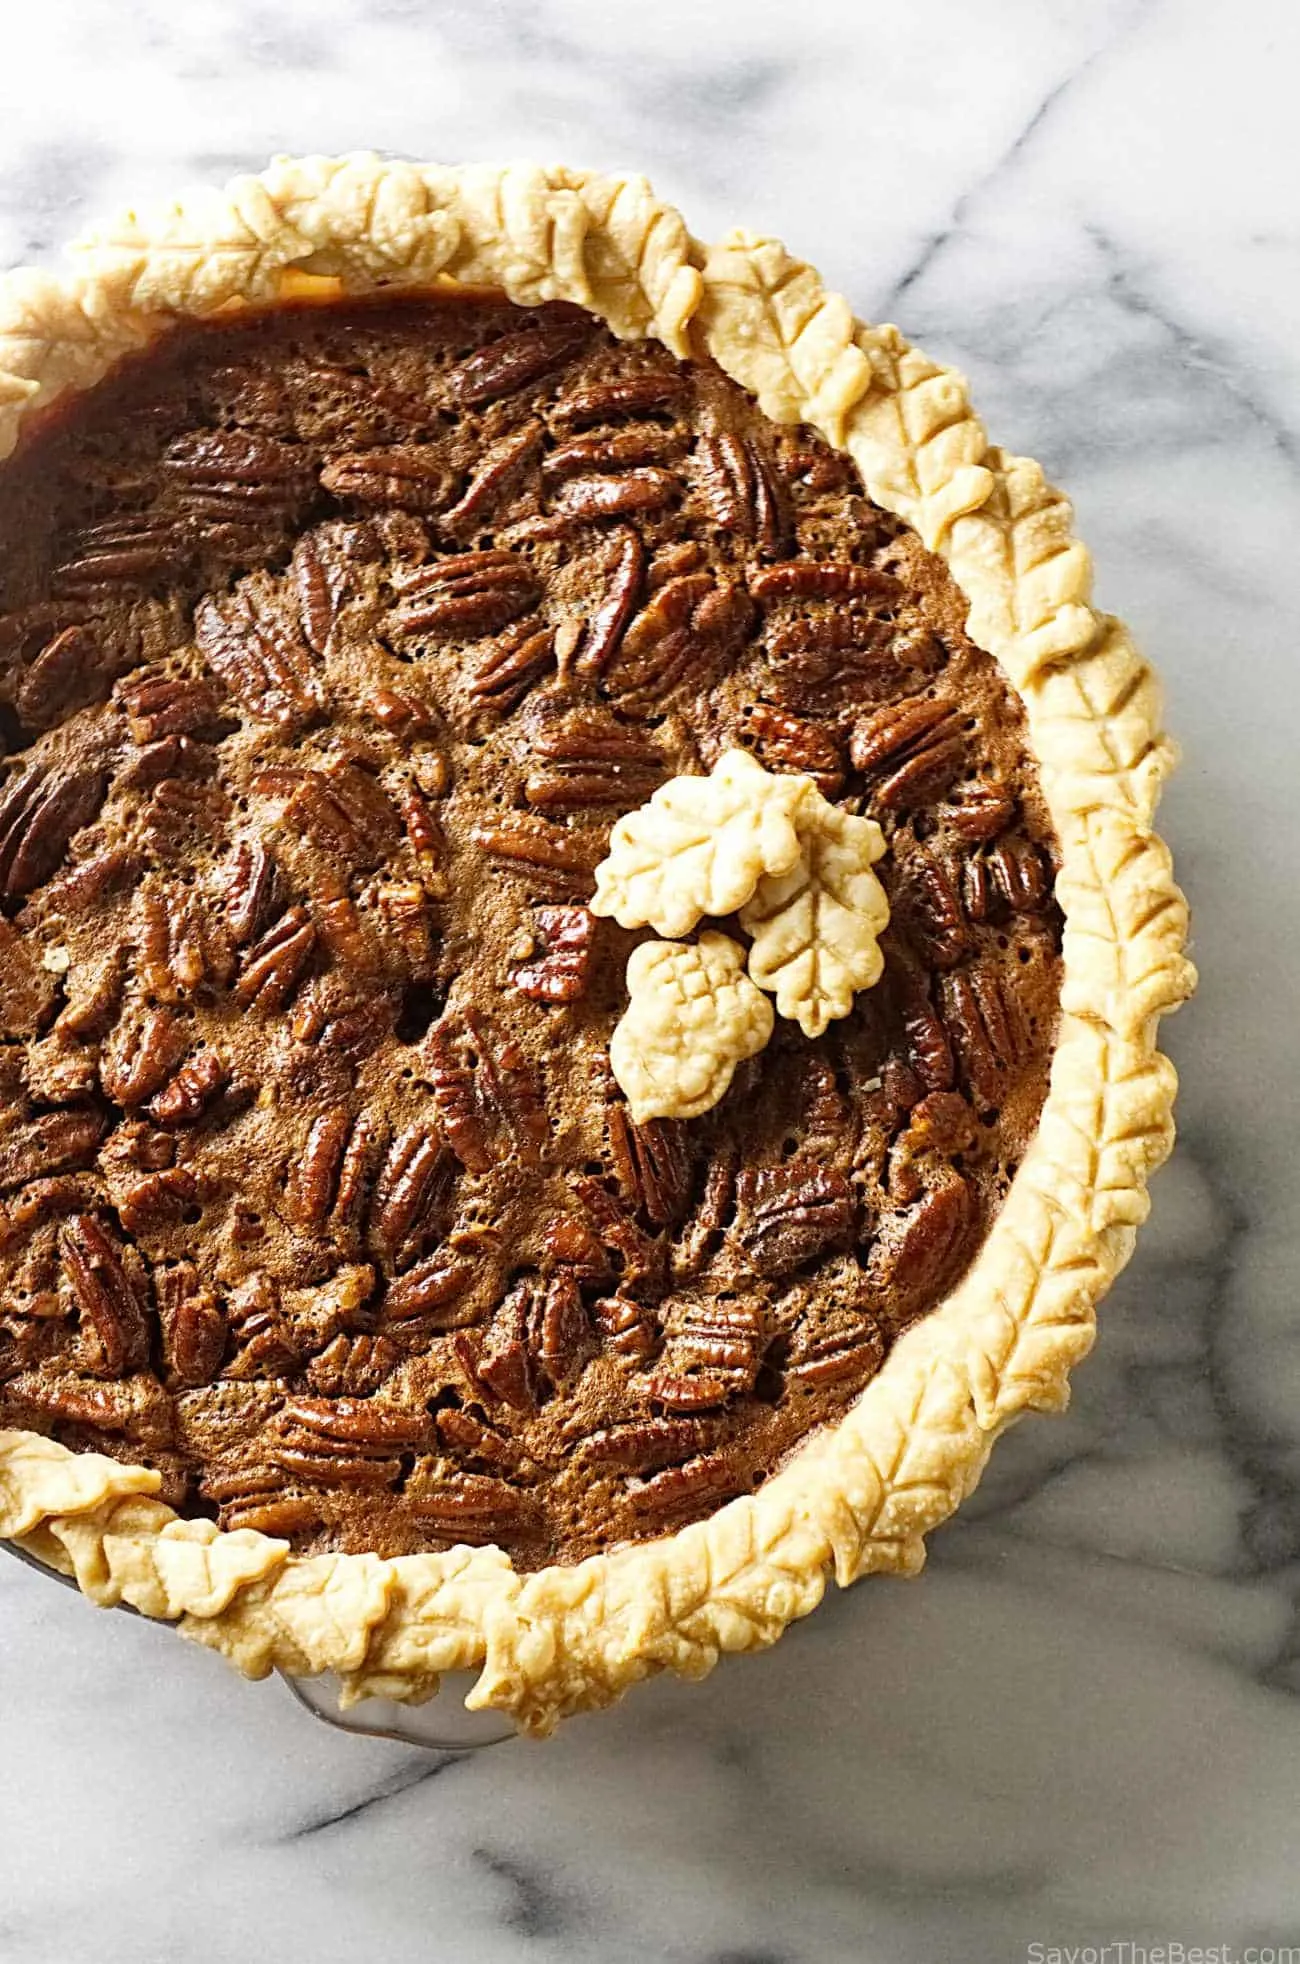 A freshly baked chocolate pecan pie with pie crust decorations. 